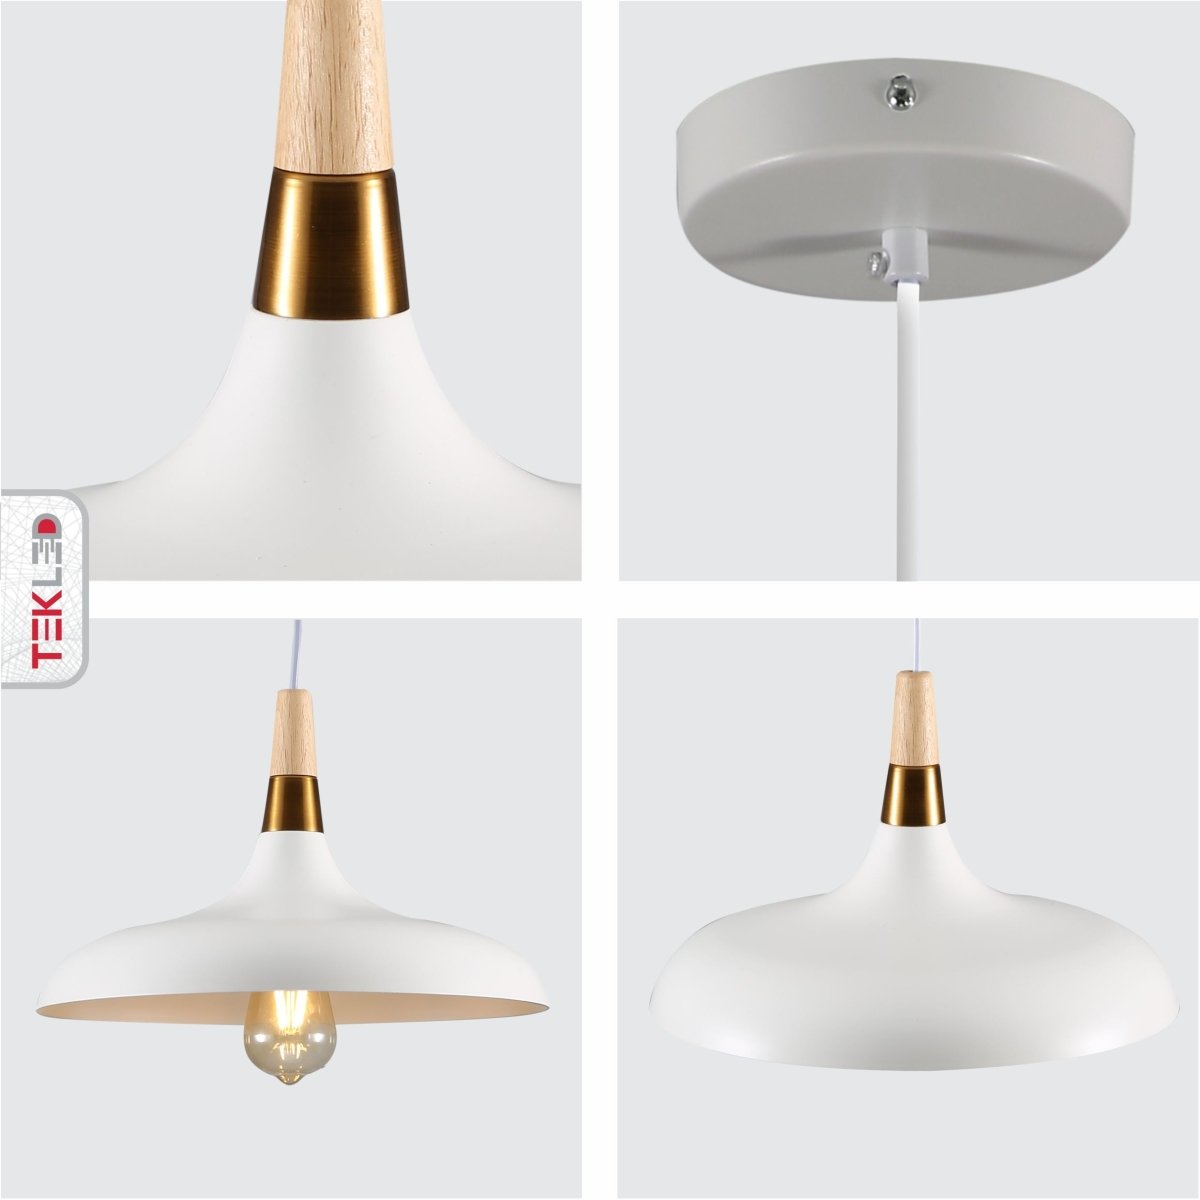 Detailed shots of White Flat Dome Wood Gold Top Metal Ceiling Pendant Light with E27 Fitting | TEKLED 150-18378